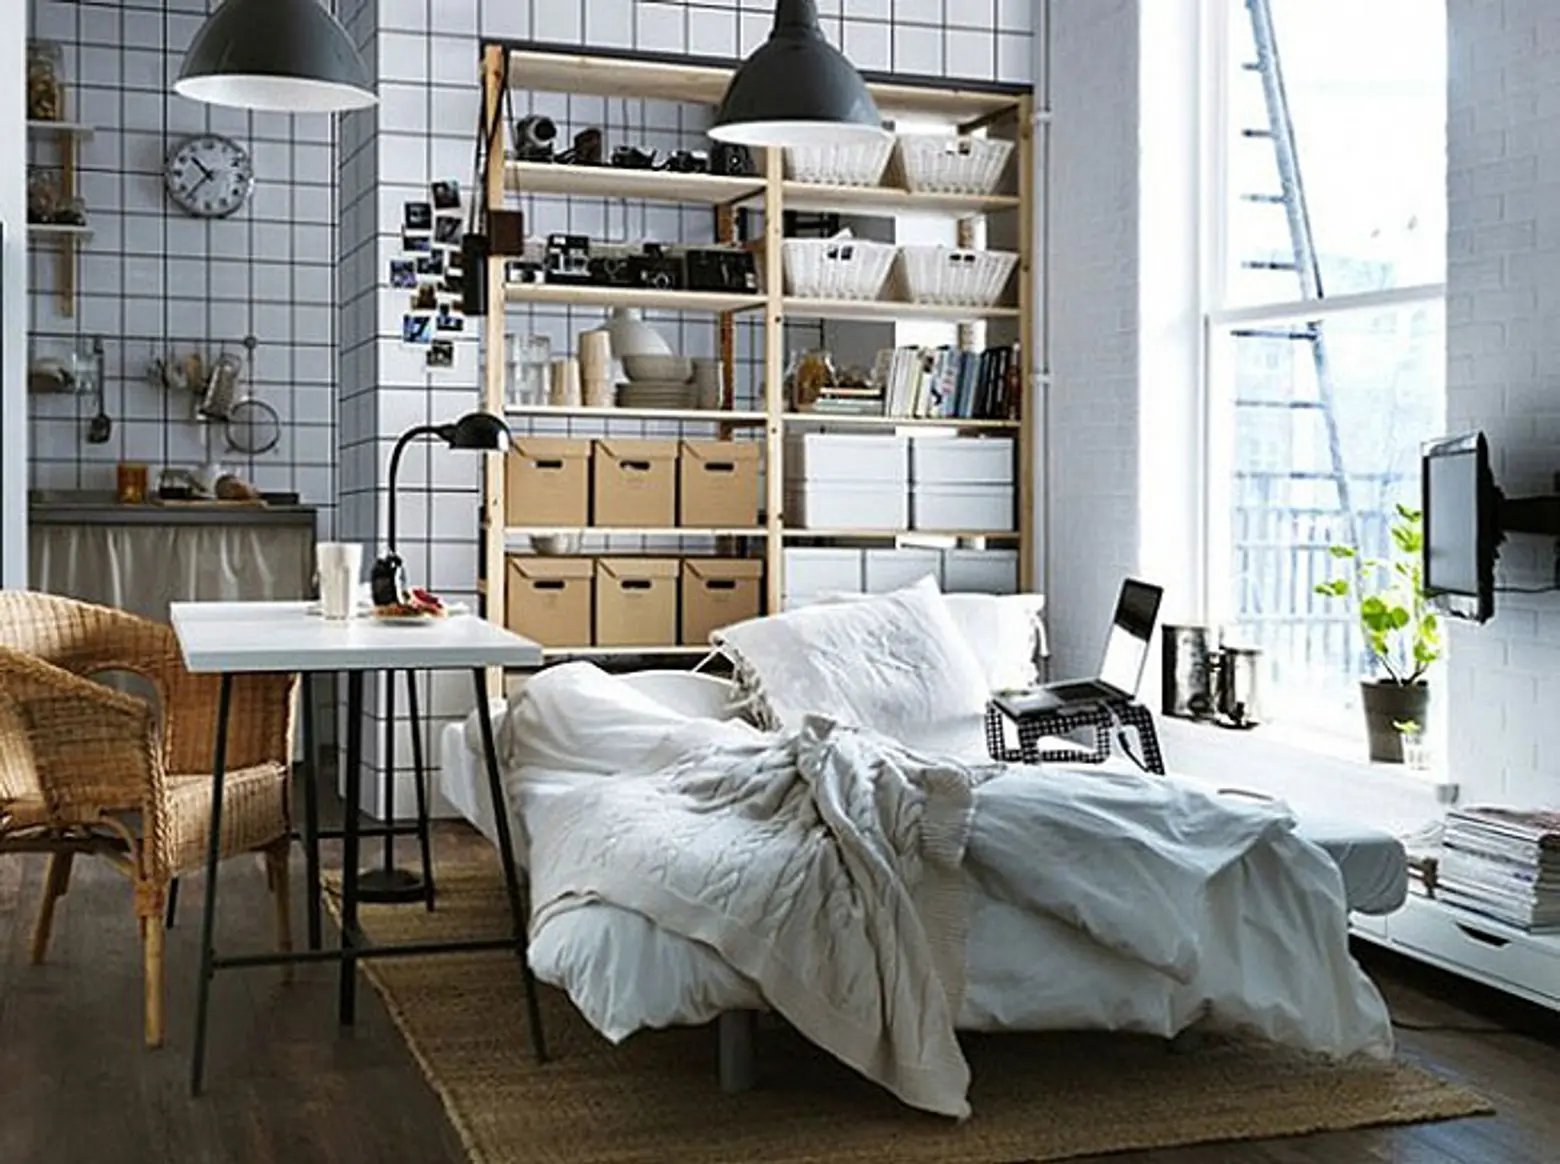 10 Ways to Make the Best of a Studio, decorating with mirrors, create zones,